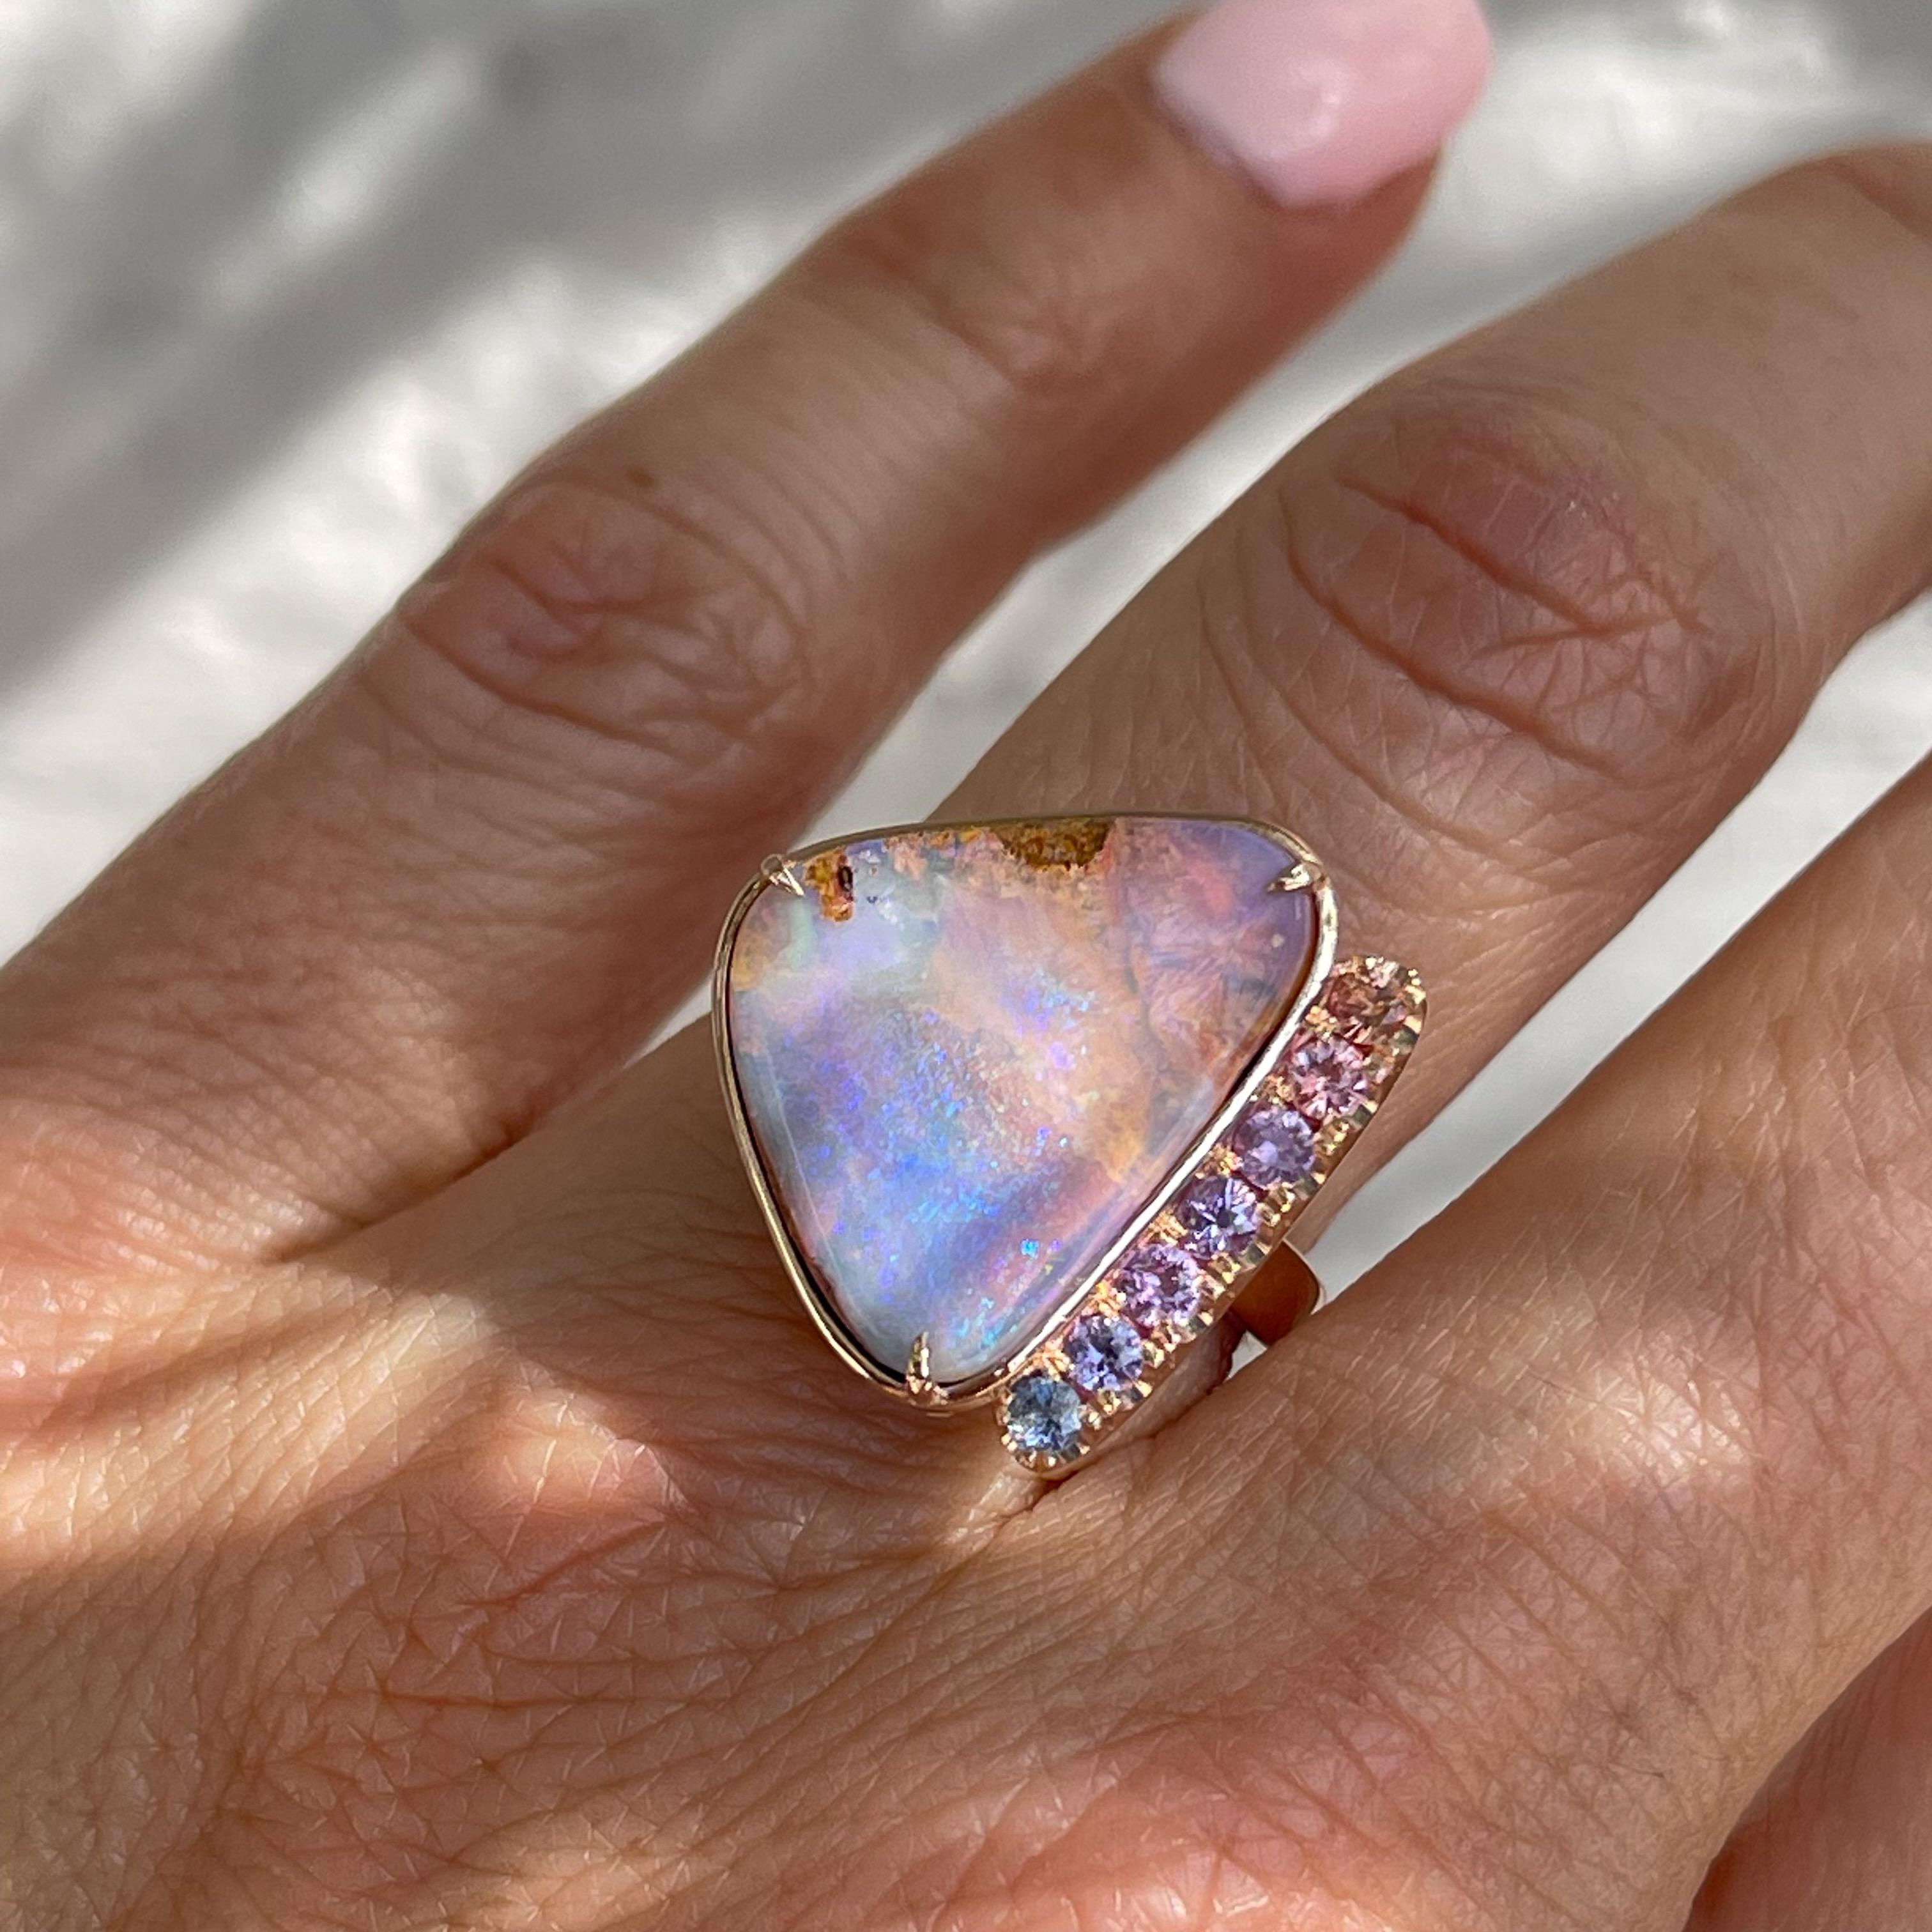 As sun sets, the skies perfuse with color in this Australian Opal Ring. From champagne pink to lavender and blue, the Boulder Opal casts stunning hues. A cascade of sapphires borders the stone in a striking chromatic complement. Though multi-toned,